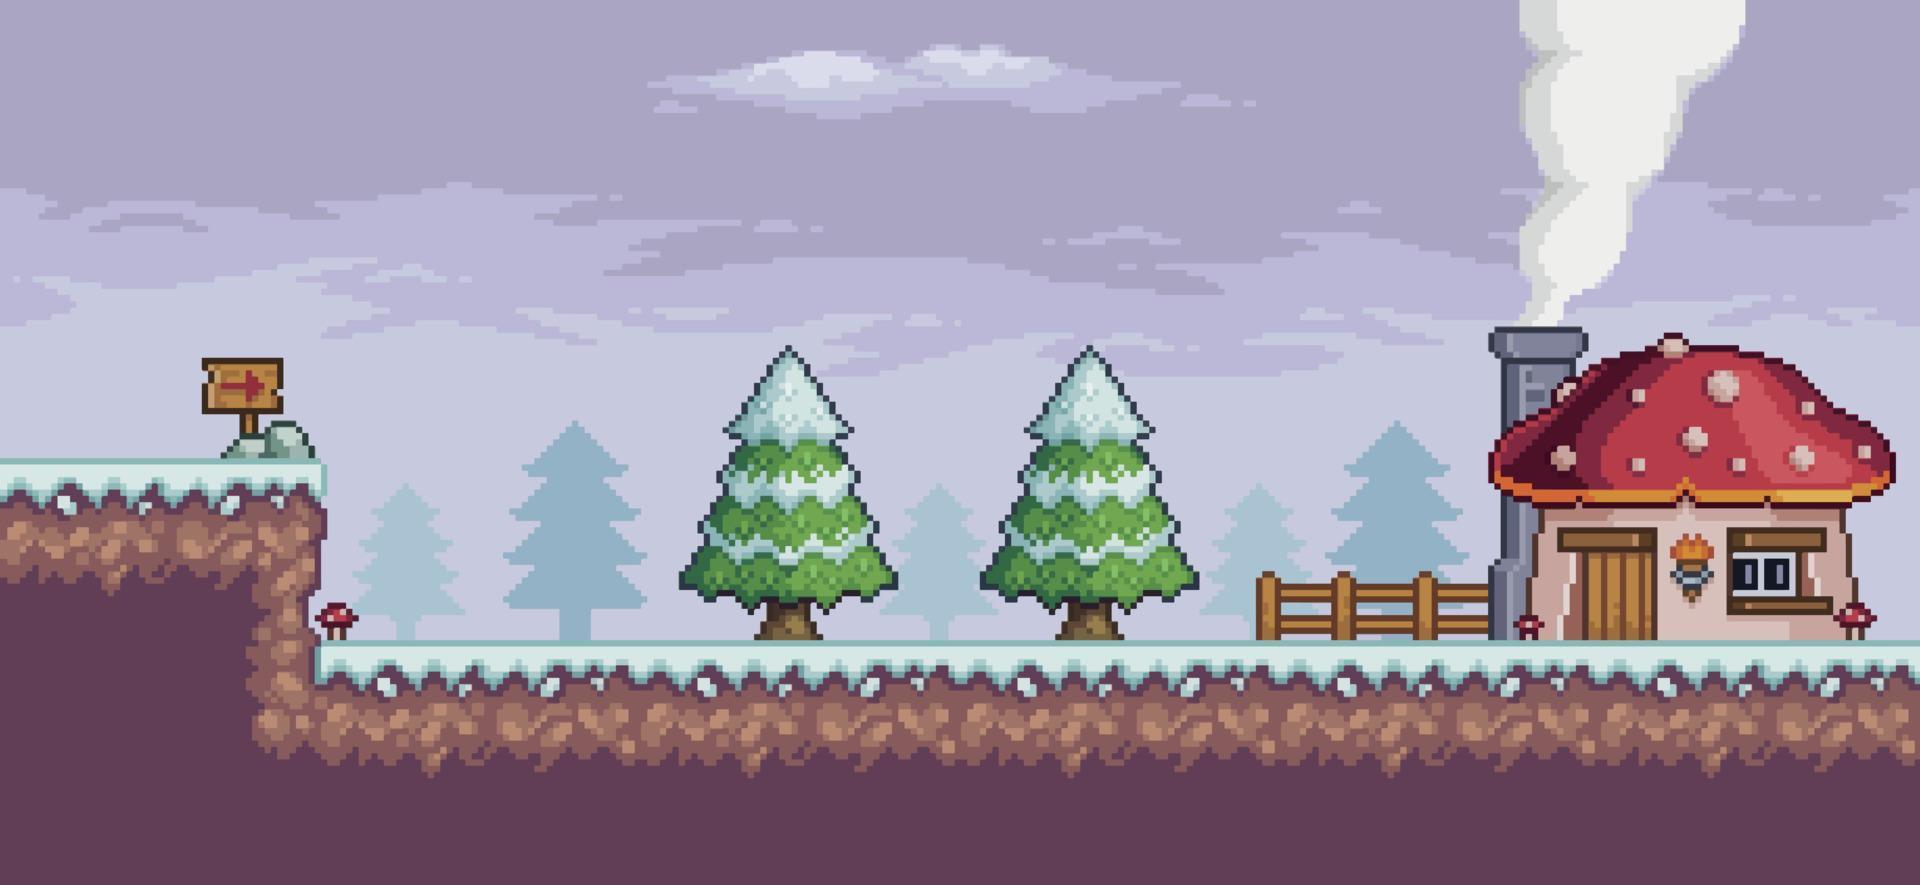 Pixel art game scene in snow with pine trees, house, fence and clouds 8bit backgroundt vector